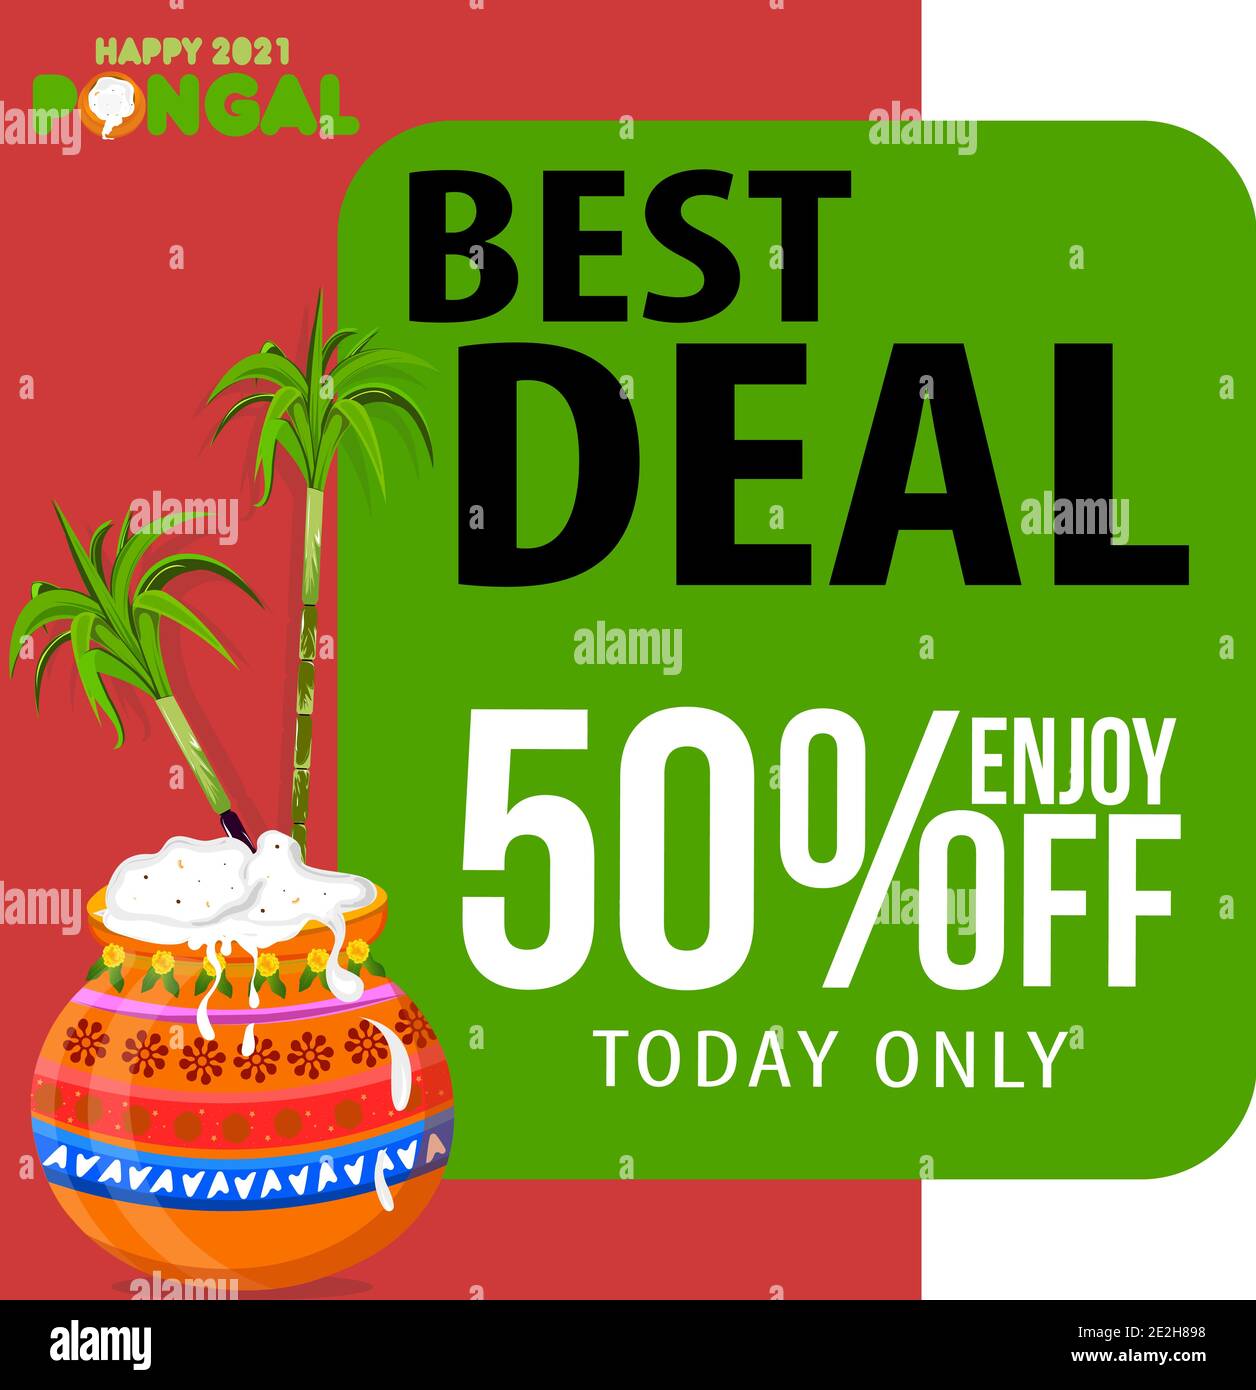 Pongal Festival Best Deal Offer Banner Design with 50% Discount Offer, Social Media Post Templates Stock Vector